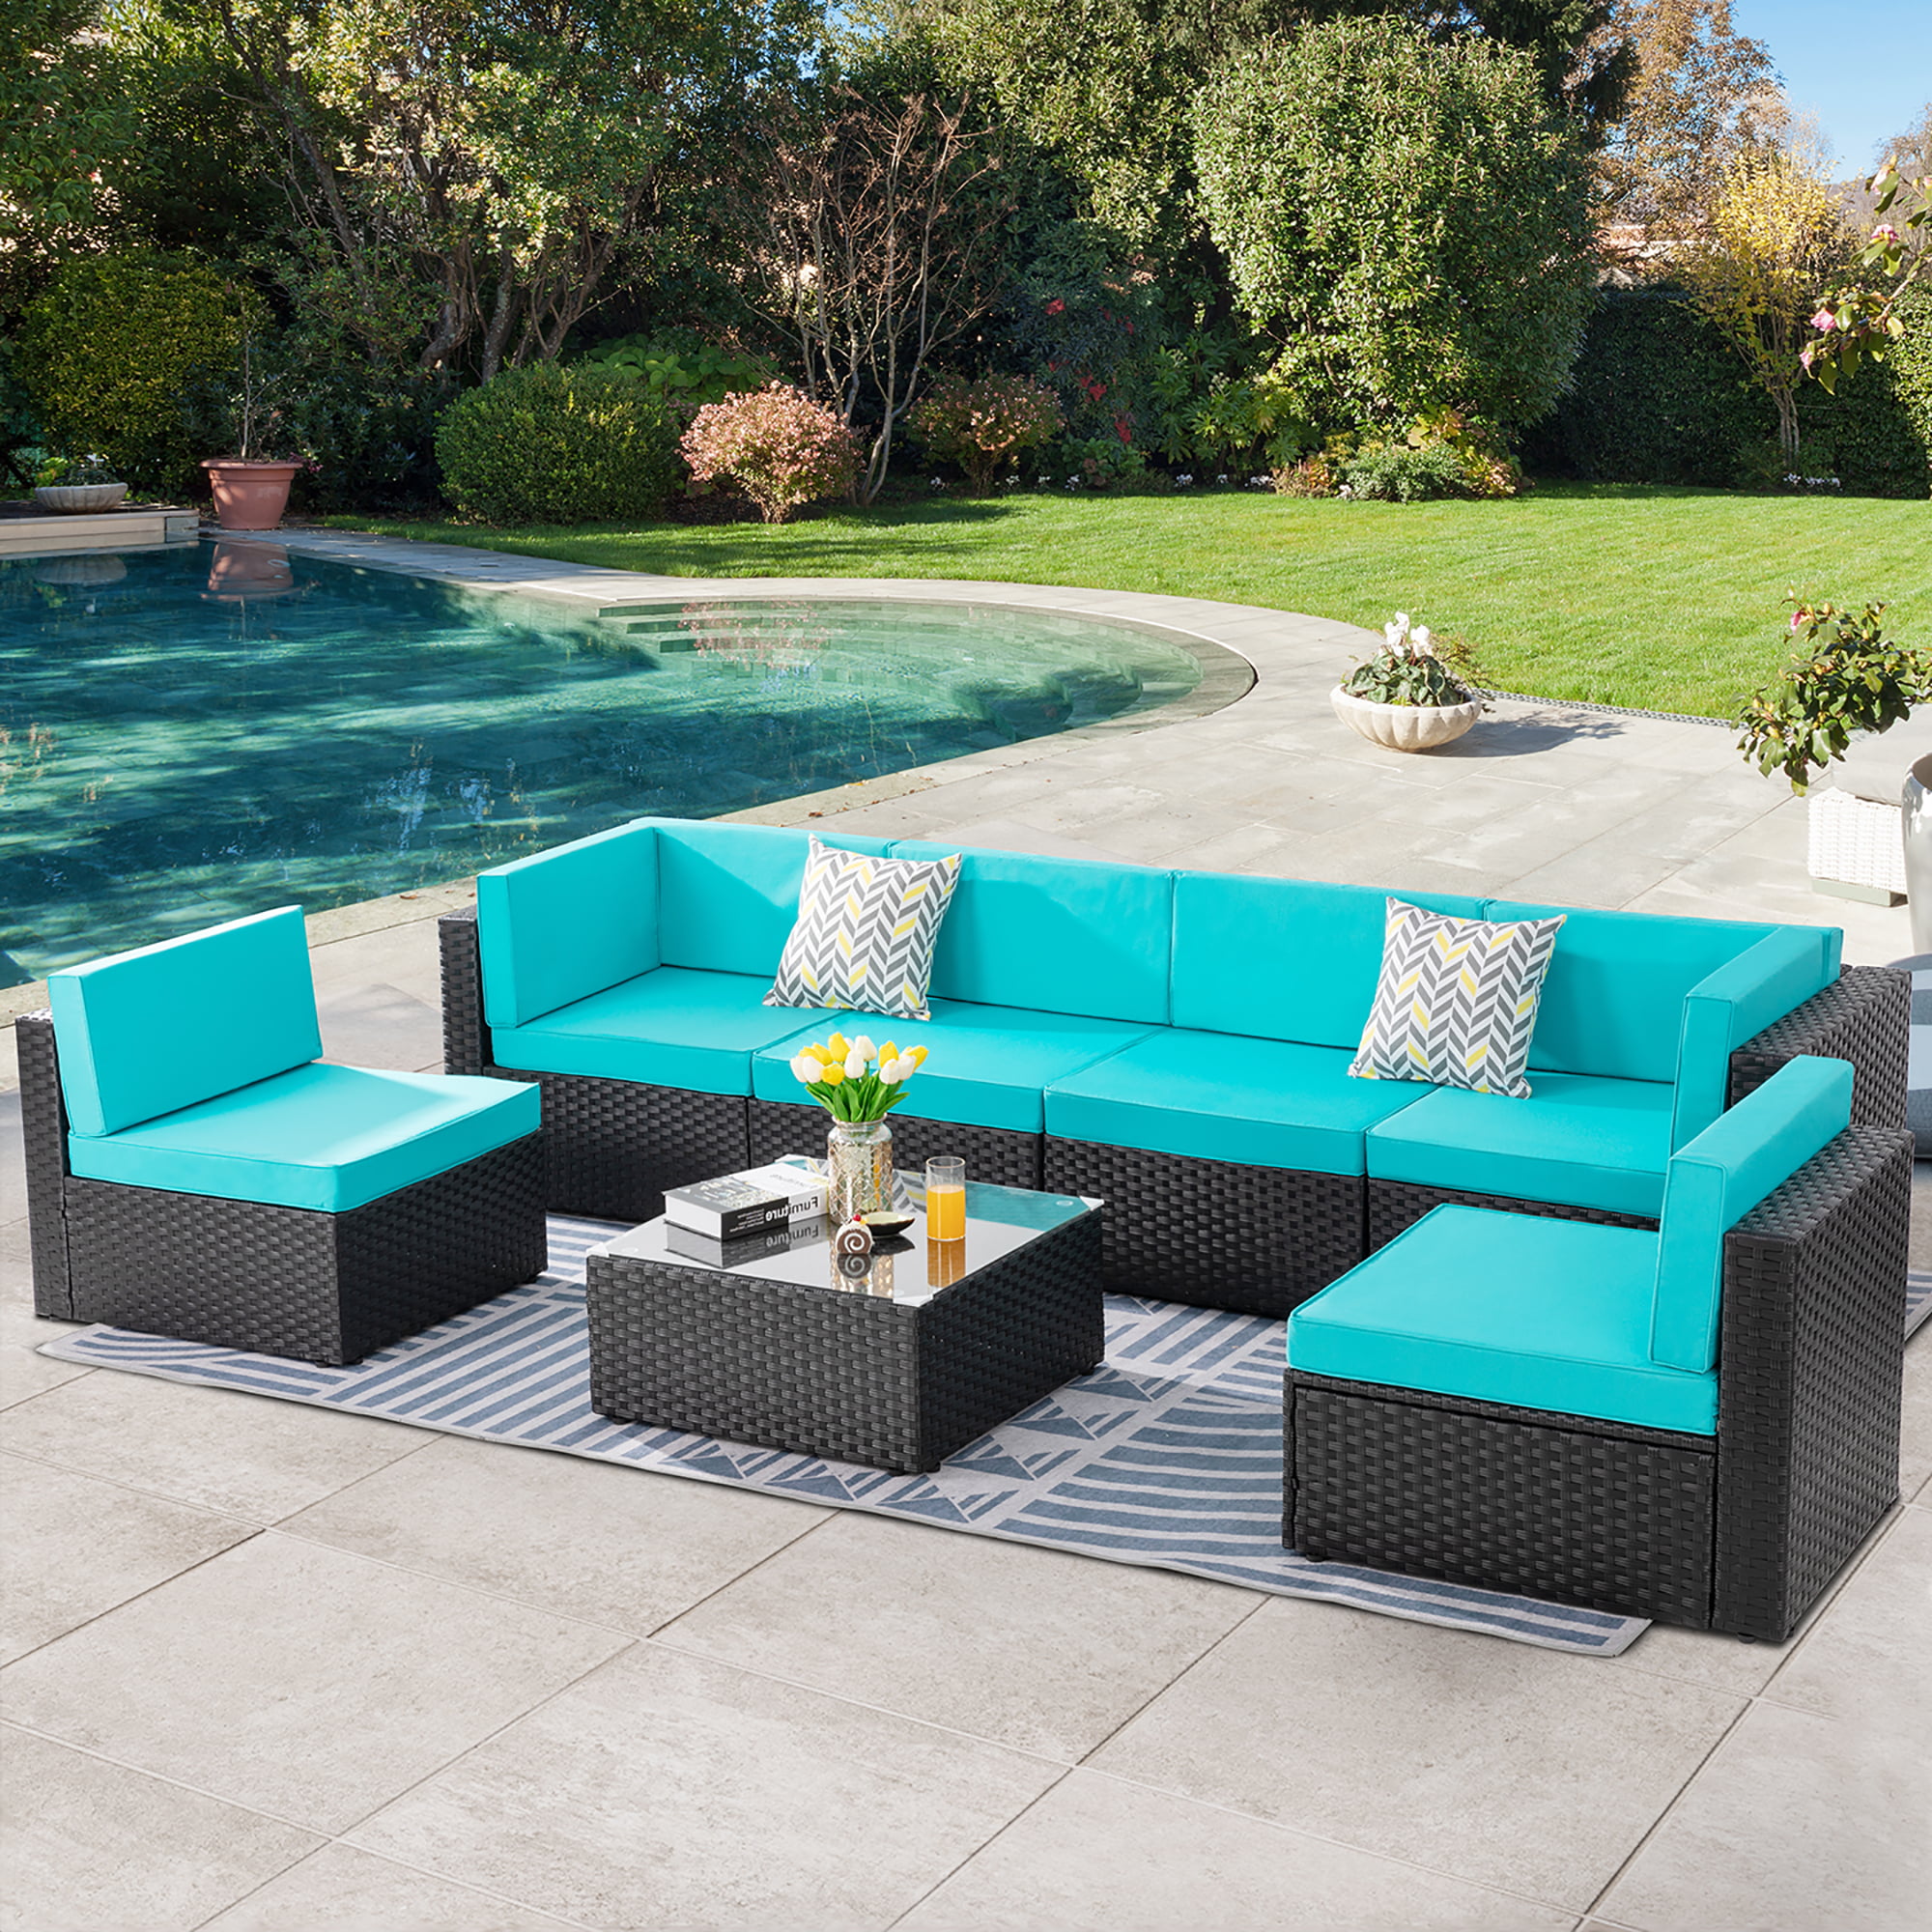 Low Back All-Weather Small Rattan Sectional Sofa with Tea Table&Washable Couch Cushions Upgrade Wicker Silver Gray Rattan 3-Piece Turquoise JAMFLY Outdoor Furniture Patio Sets 